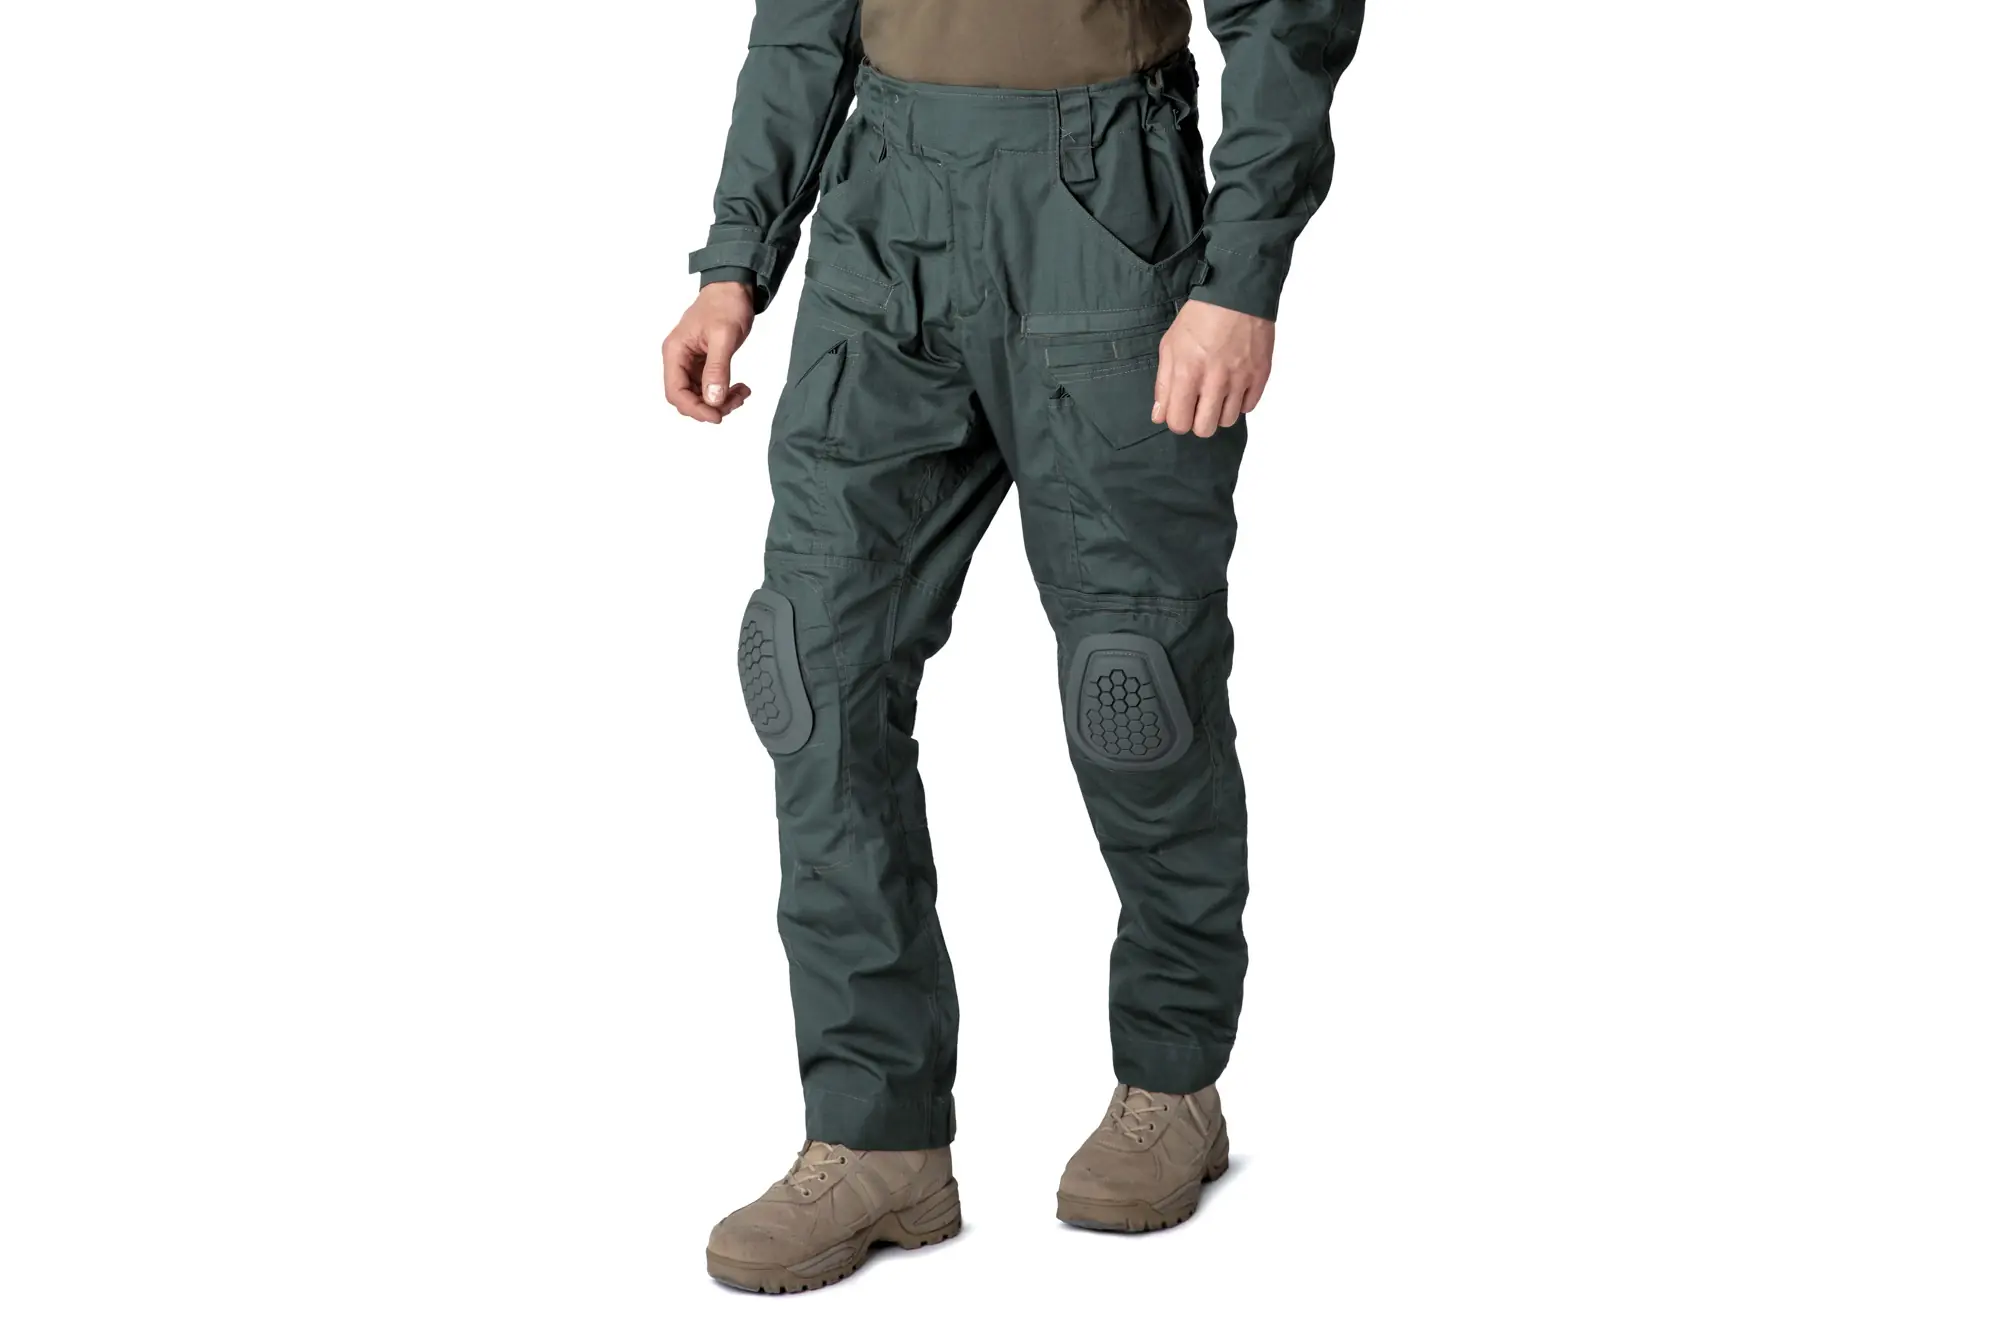 Primal Combat G4 Trousers - Olive